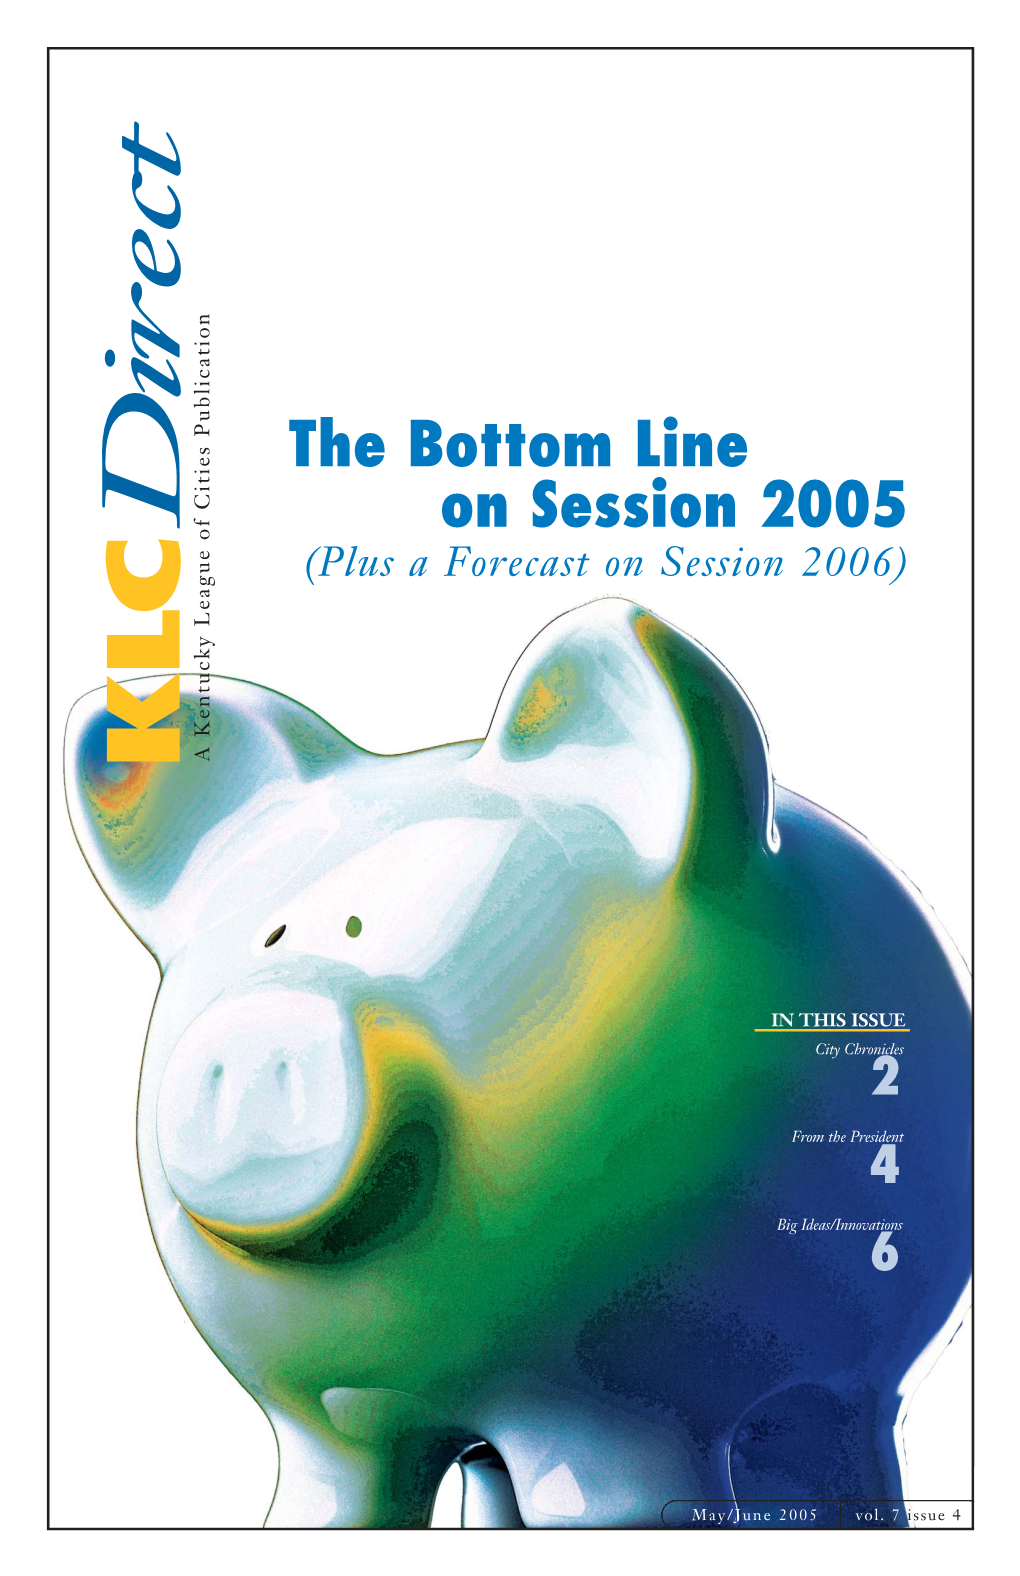 The Bottom Line on Session 2005